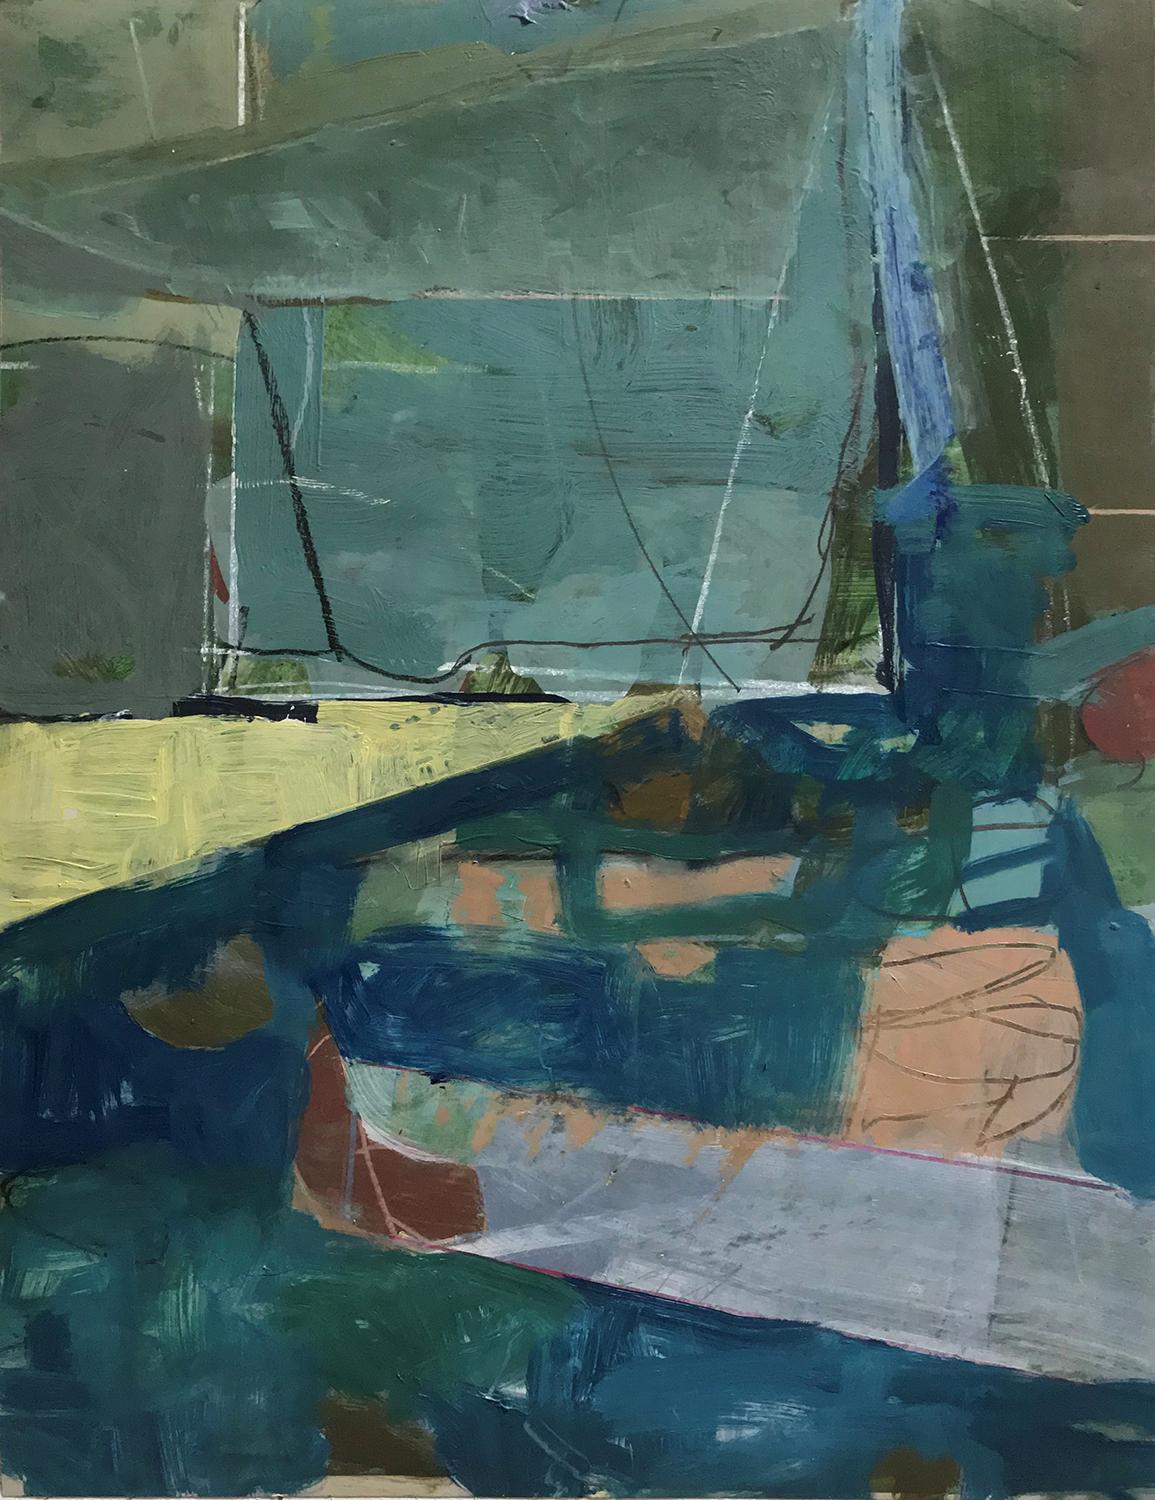 James O'Shea Abstract Drawing - Tablescape III (Abstract Framed Gouache Drawing on Paper in Teal, Blue, & Green)